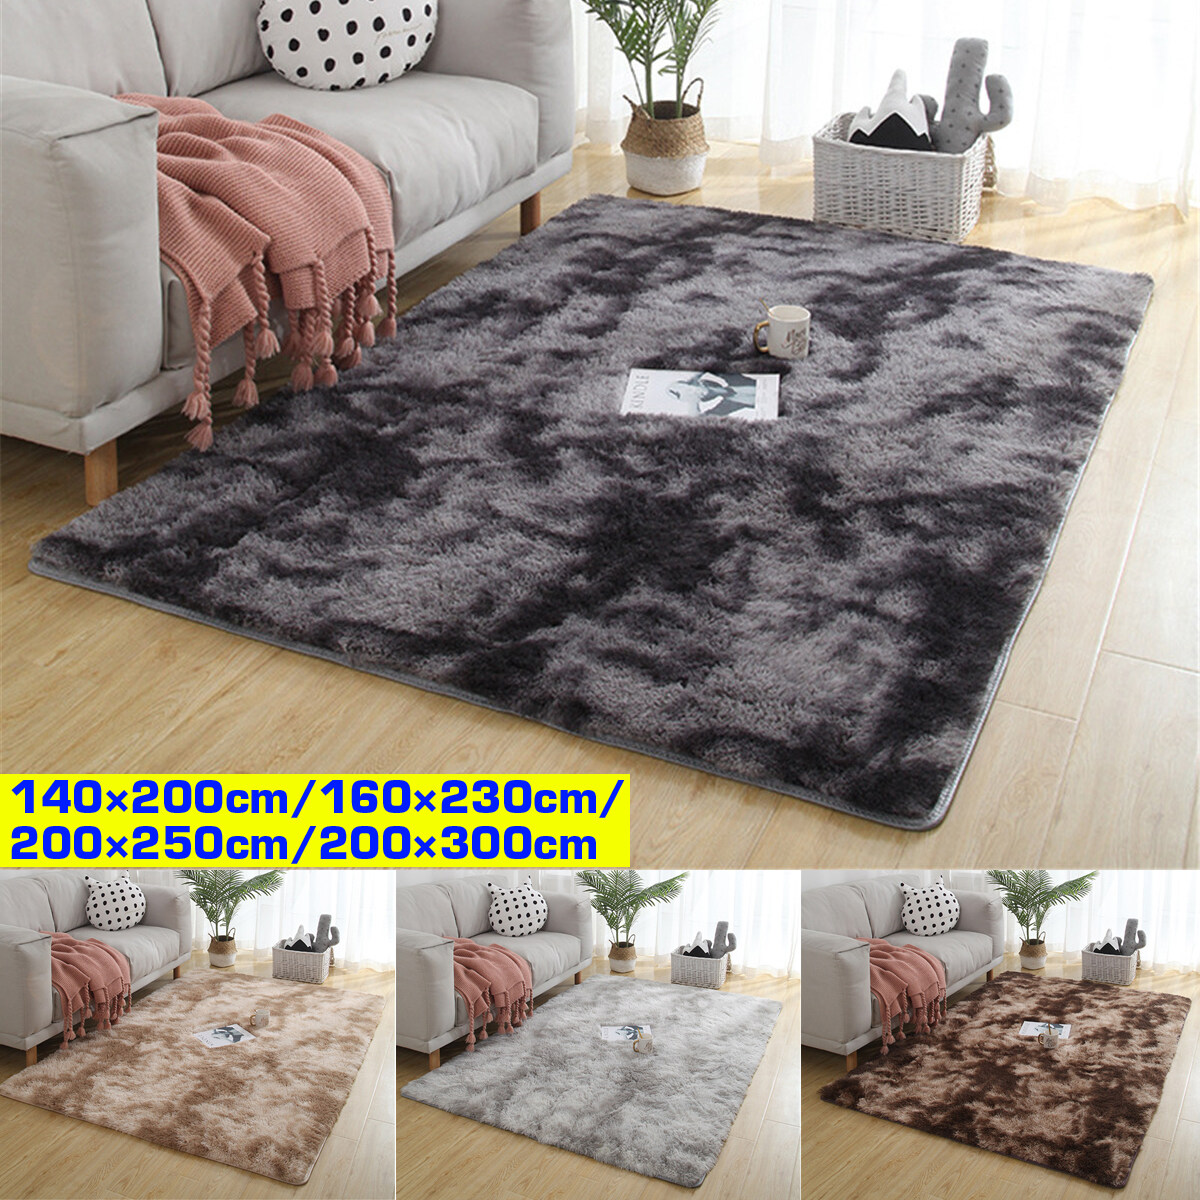 200 300cm Large Soft Gy Carpet 50mm, Large Area Rugs Under 200